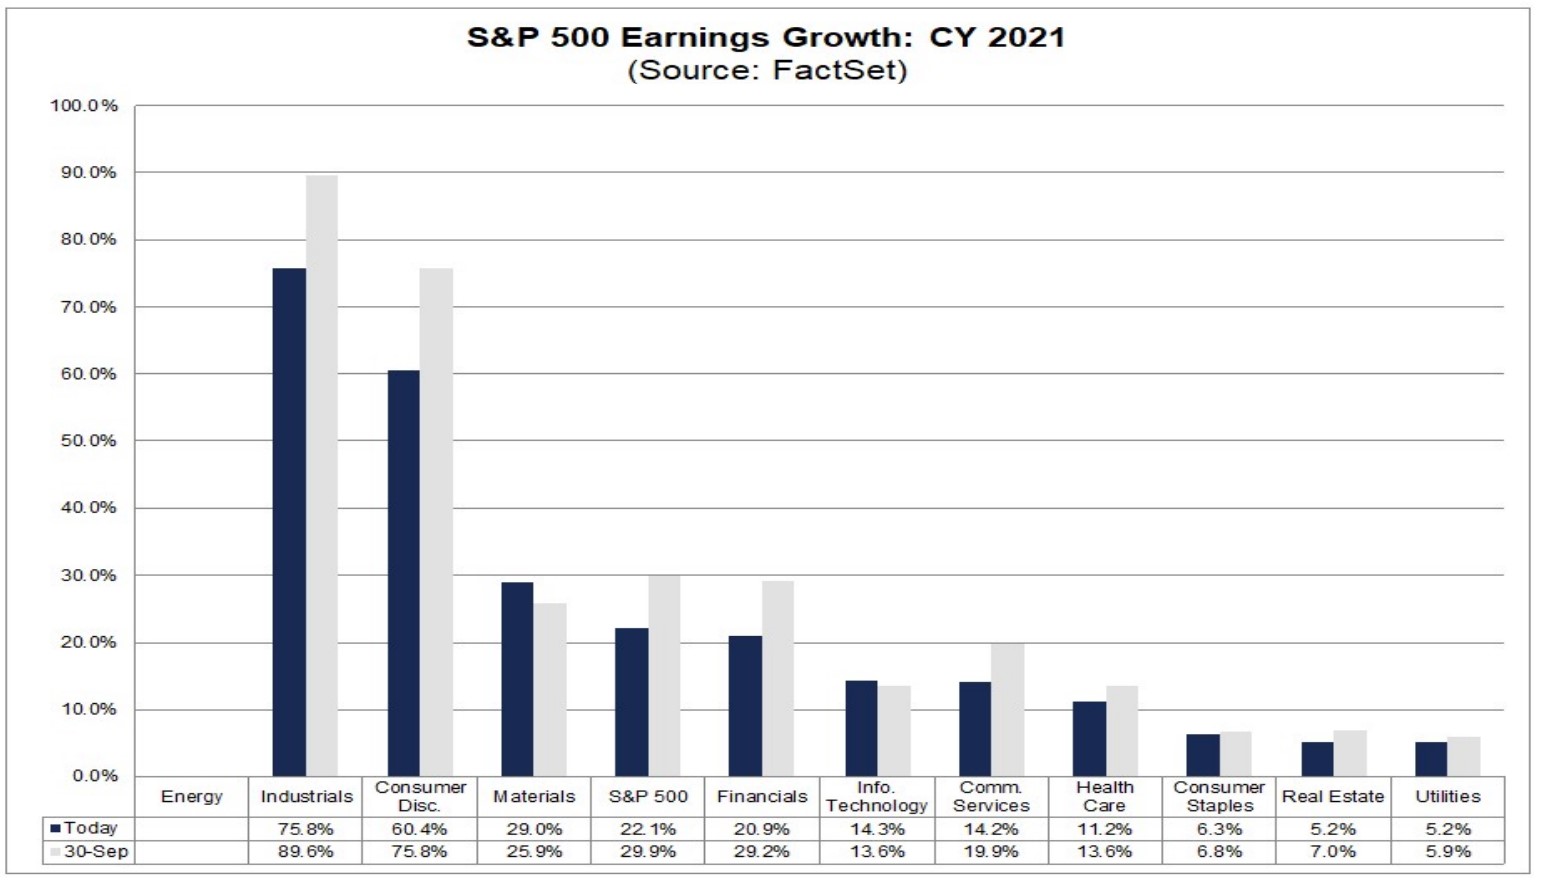 S&P 500 Sector Earnings Growth CY 2021